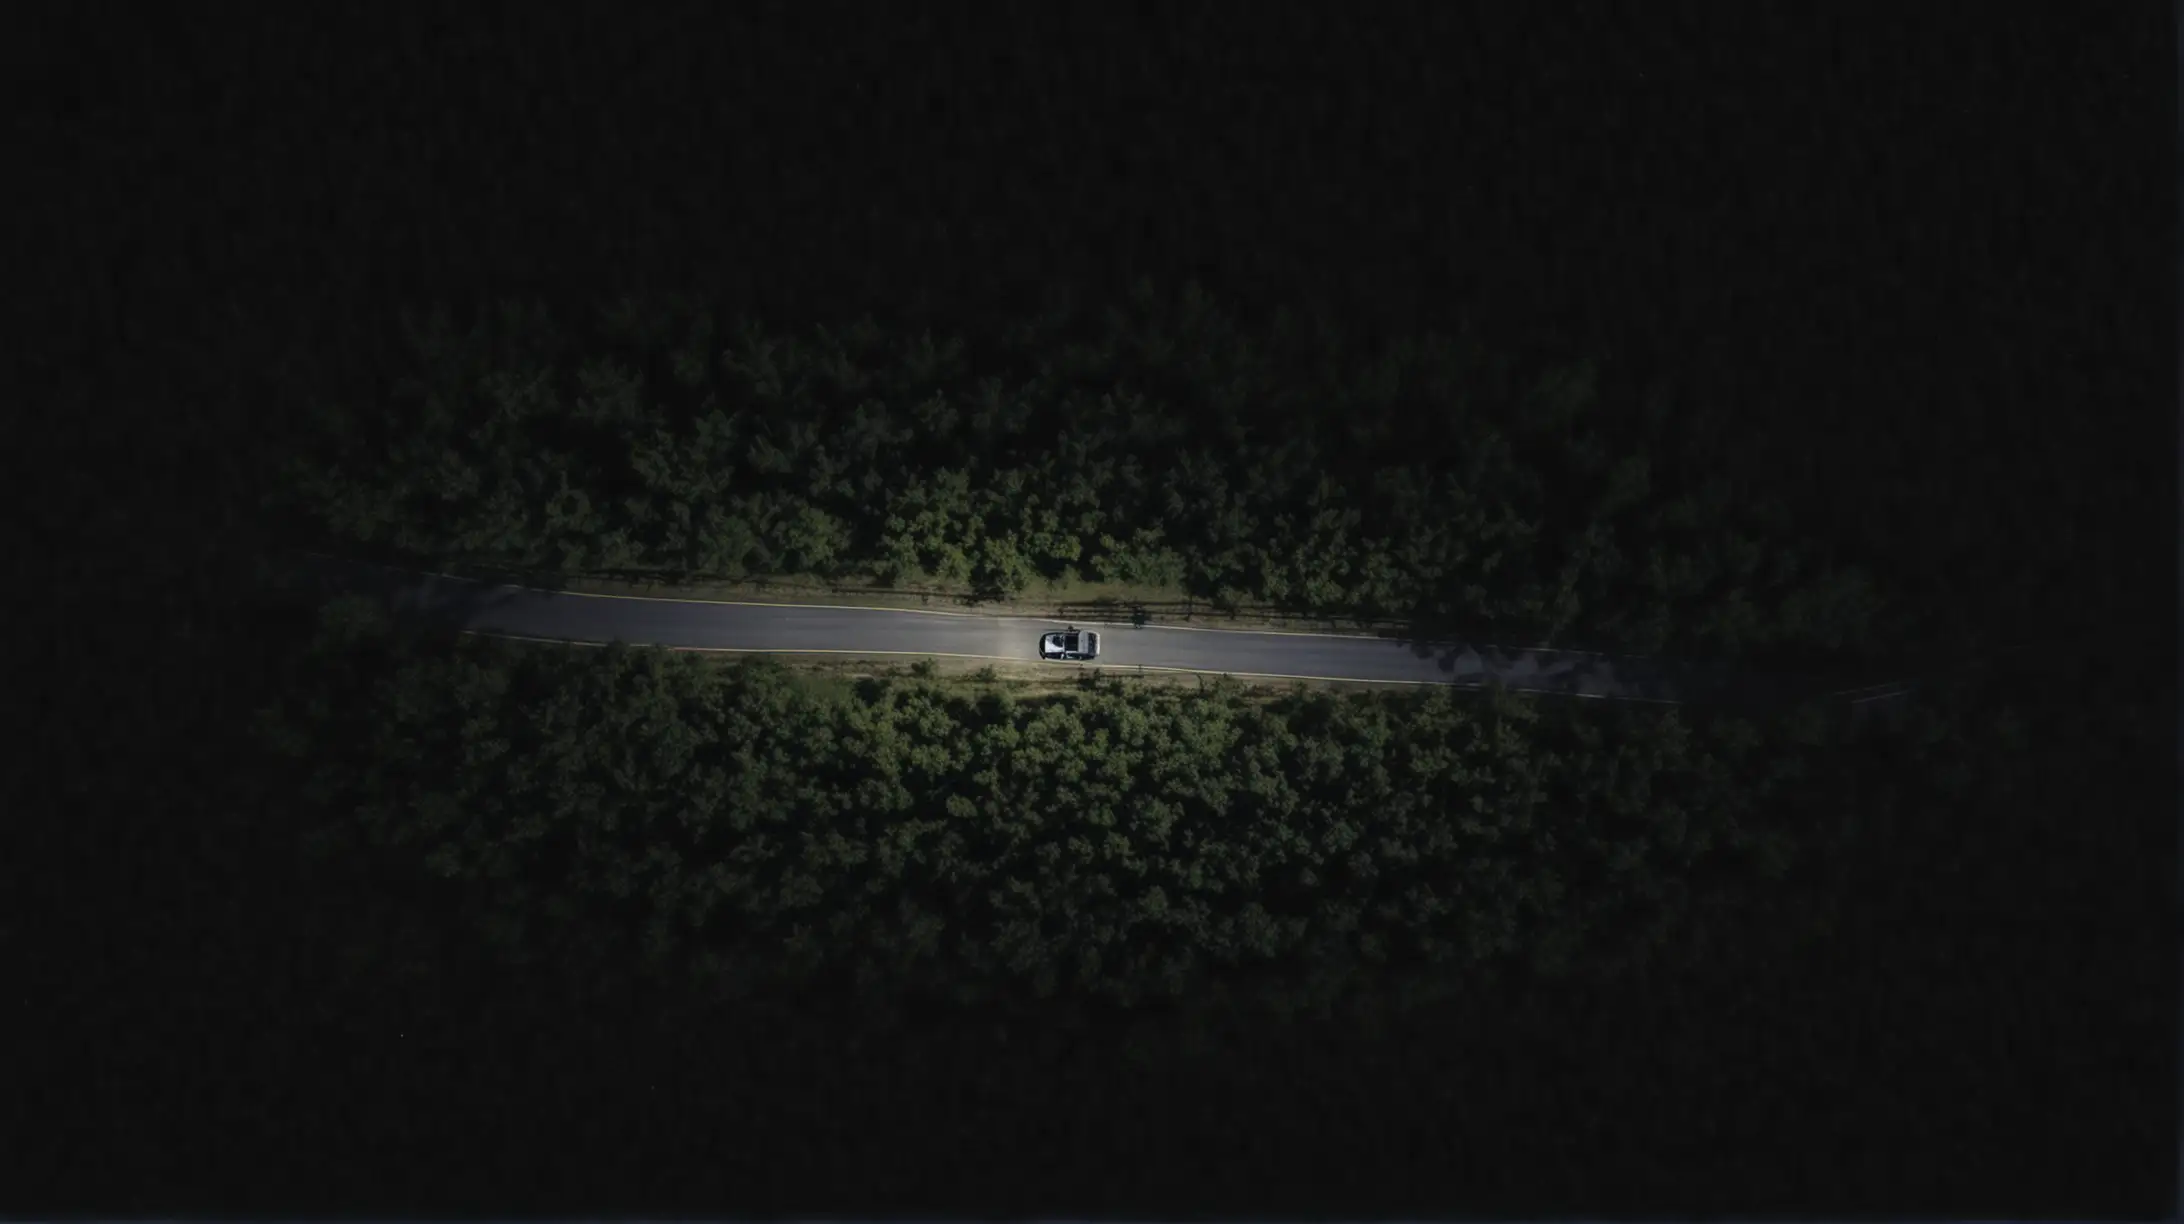 Generate a very high-angle overhead shot of a vehicle traveling down a dark, winding, rural southern road at night.